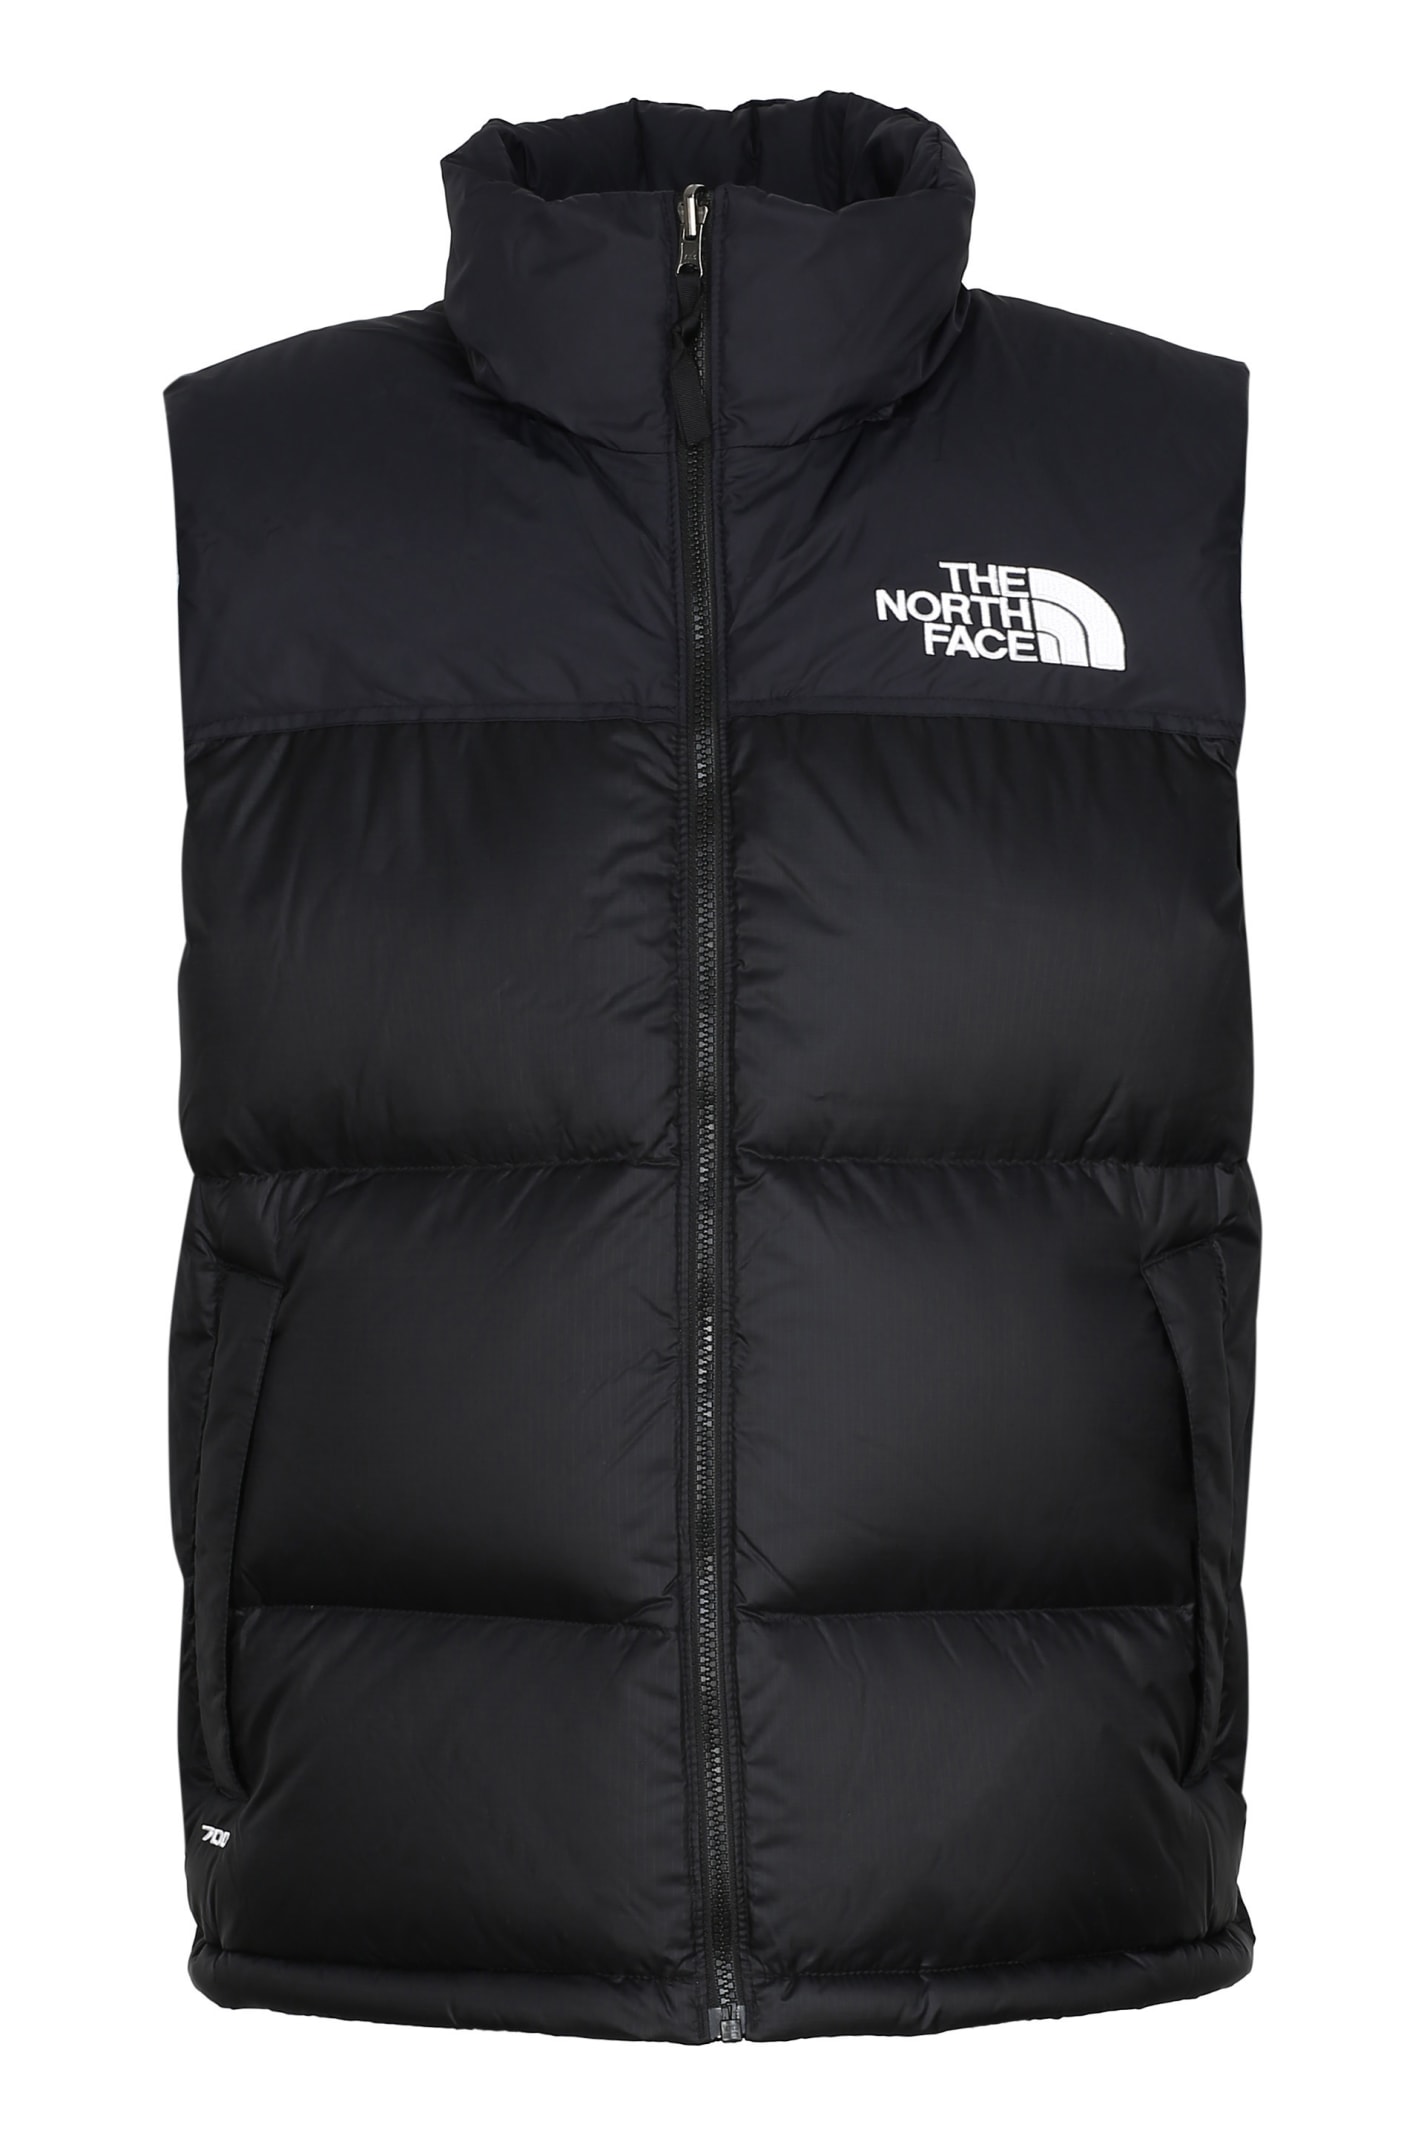 body warmers womens north face